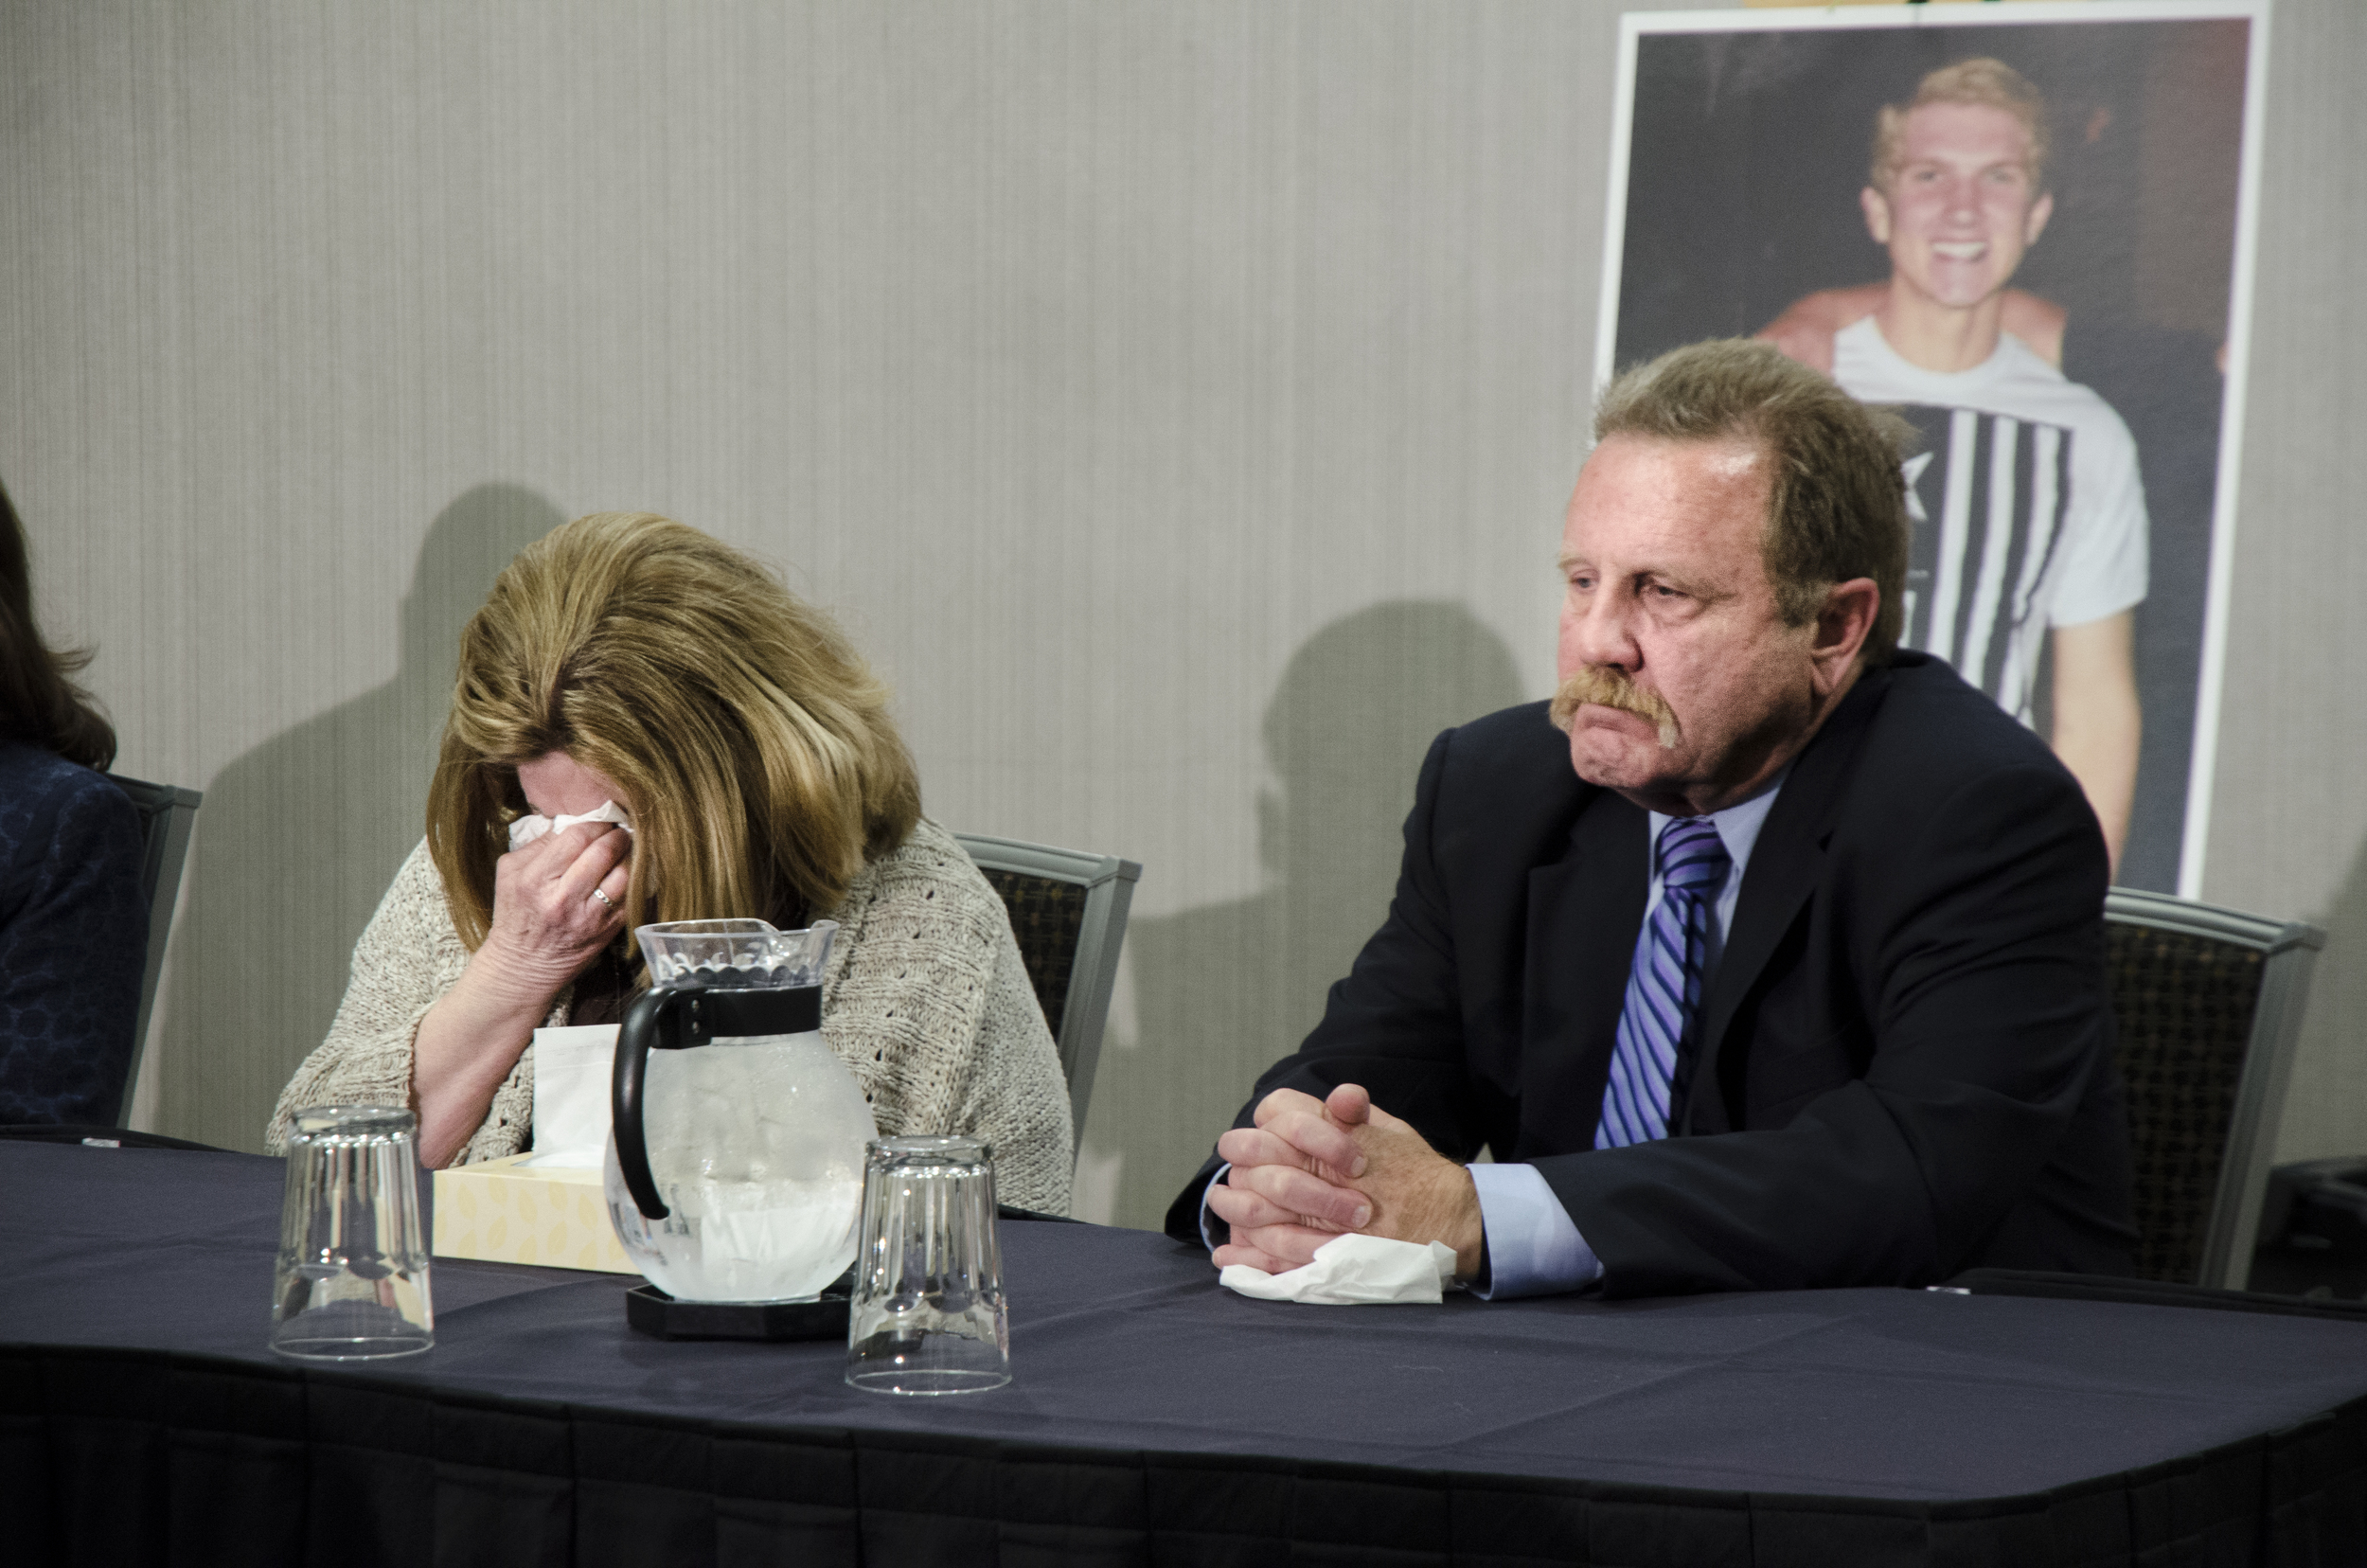   Gina McMillan-Weese sits next to Ryan’s father Walter McMillan as she covers her face and cries during the news conference held by their attorneys on February 23, 2016 in Denton, Texas.  